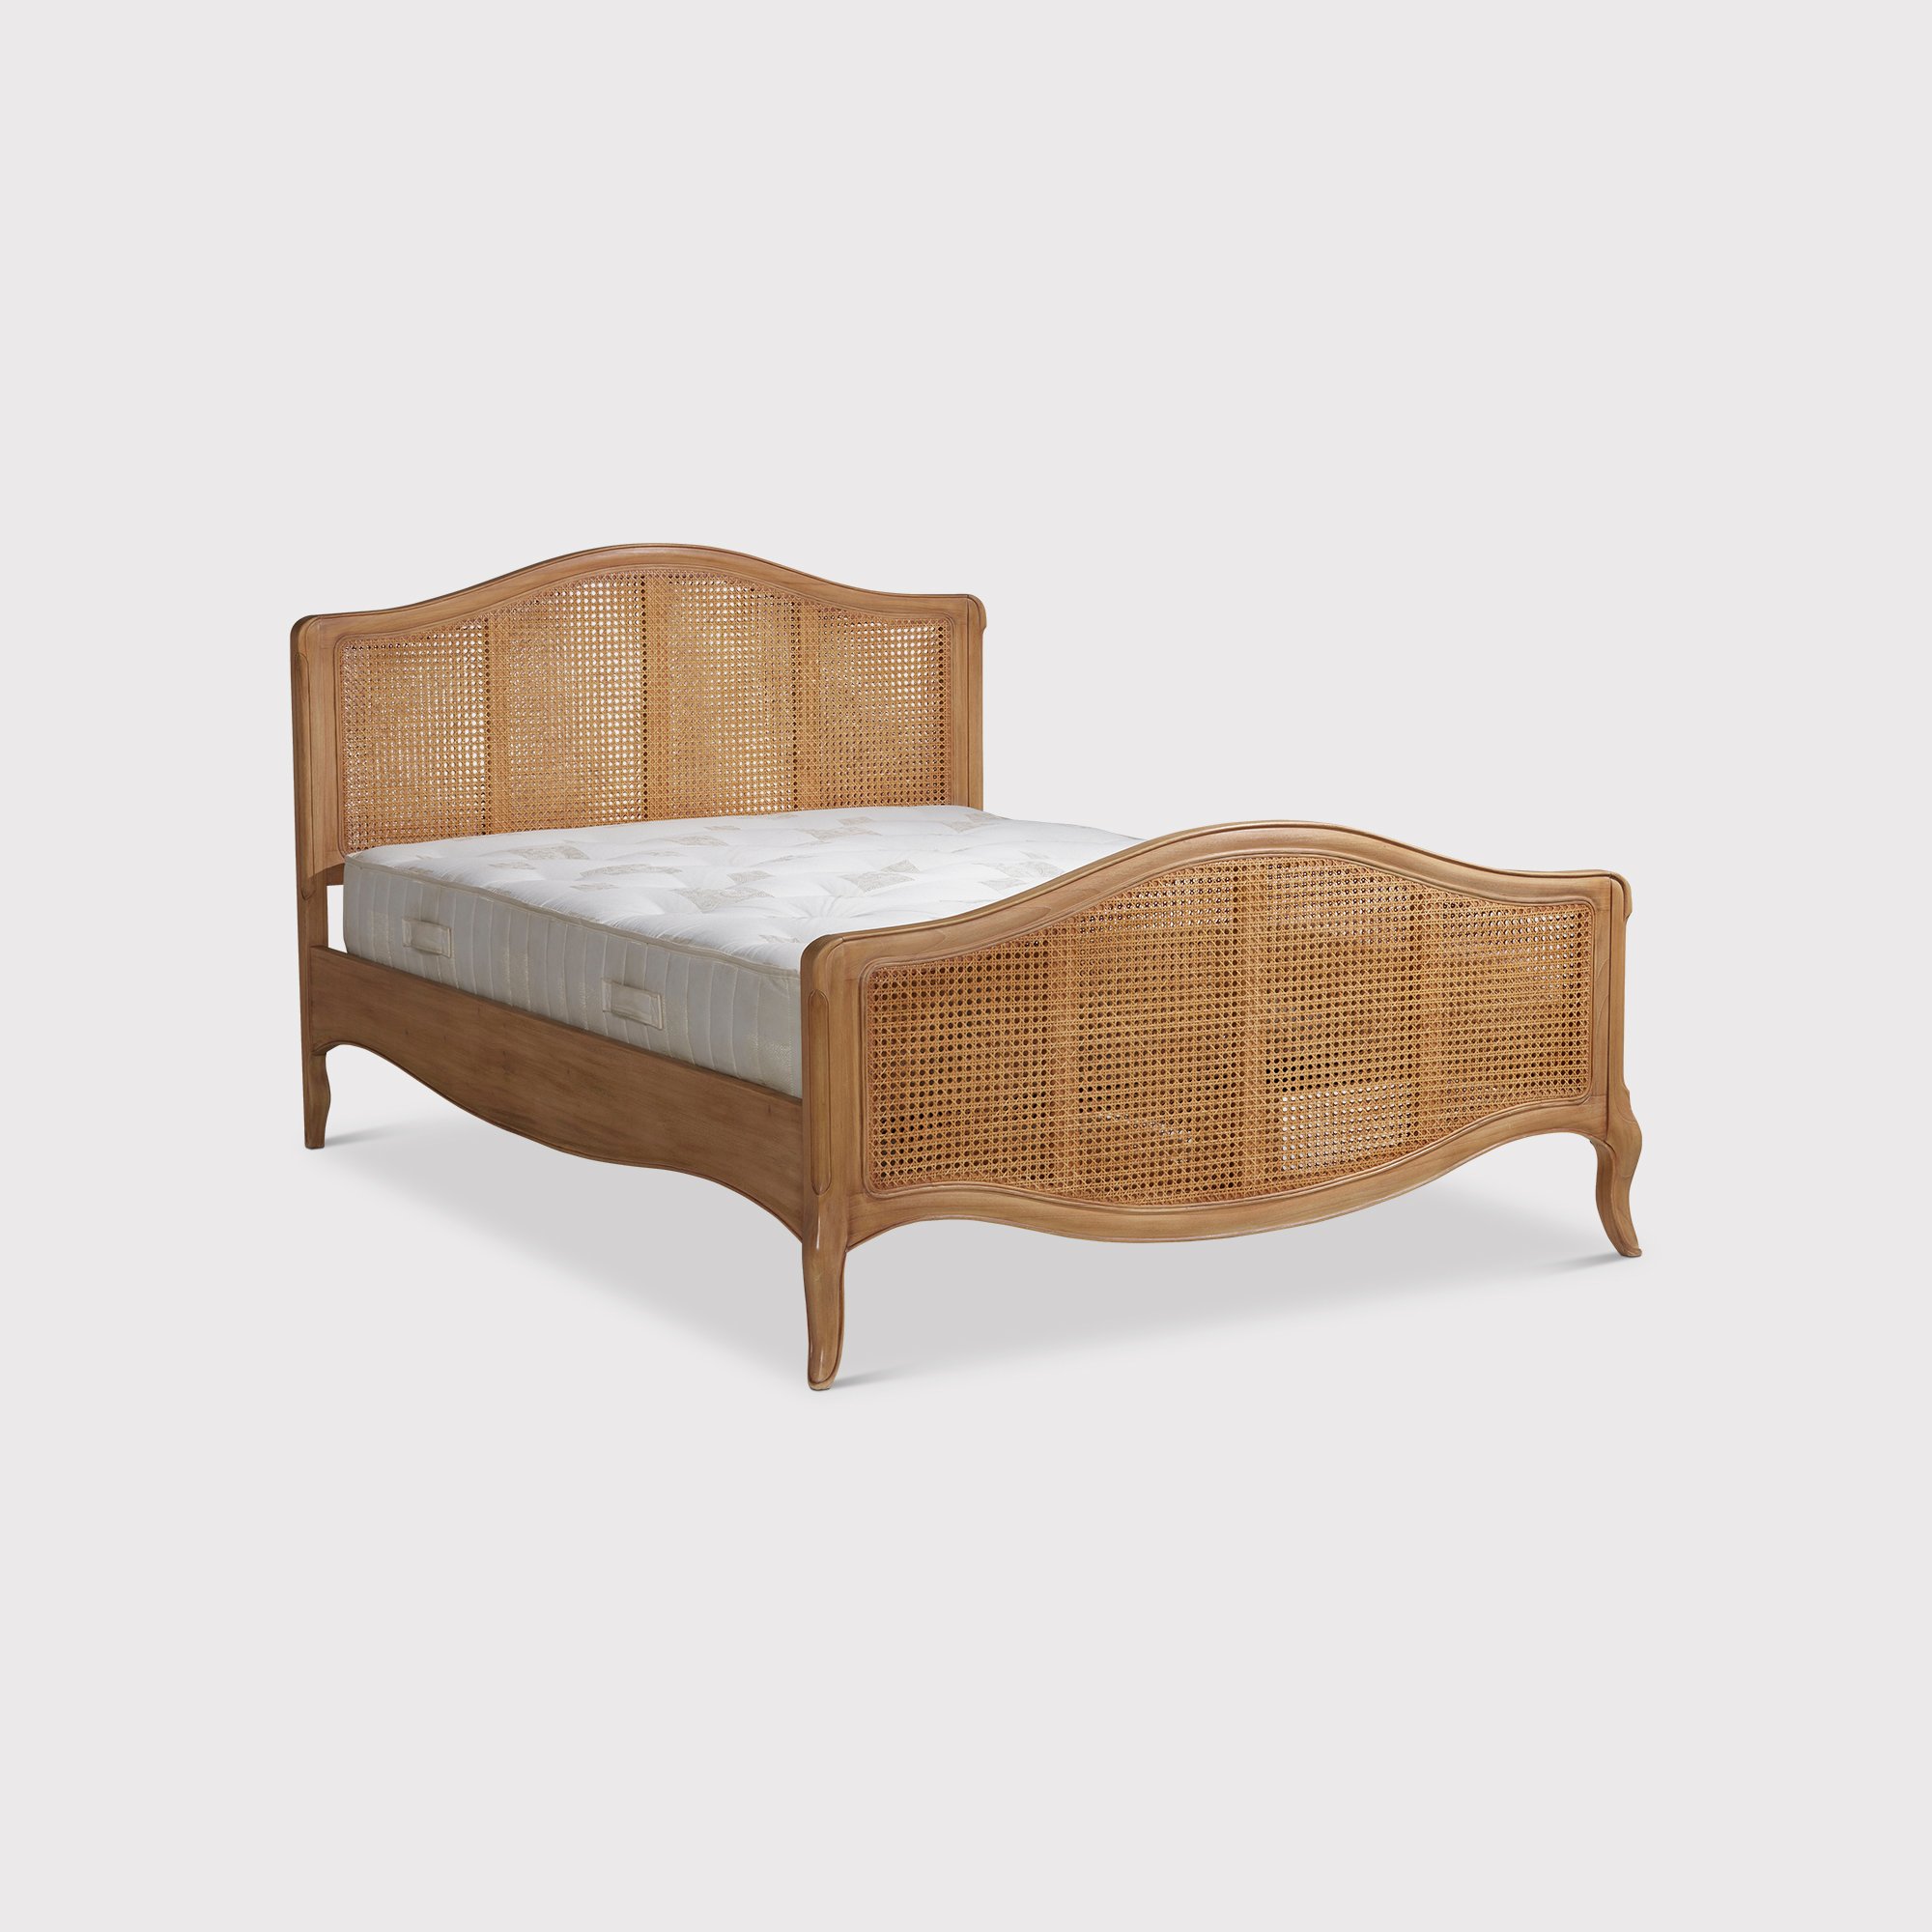 Cecile 150cm High Foot End Bed, Neutral Wood | King | Barker & Stonehouse